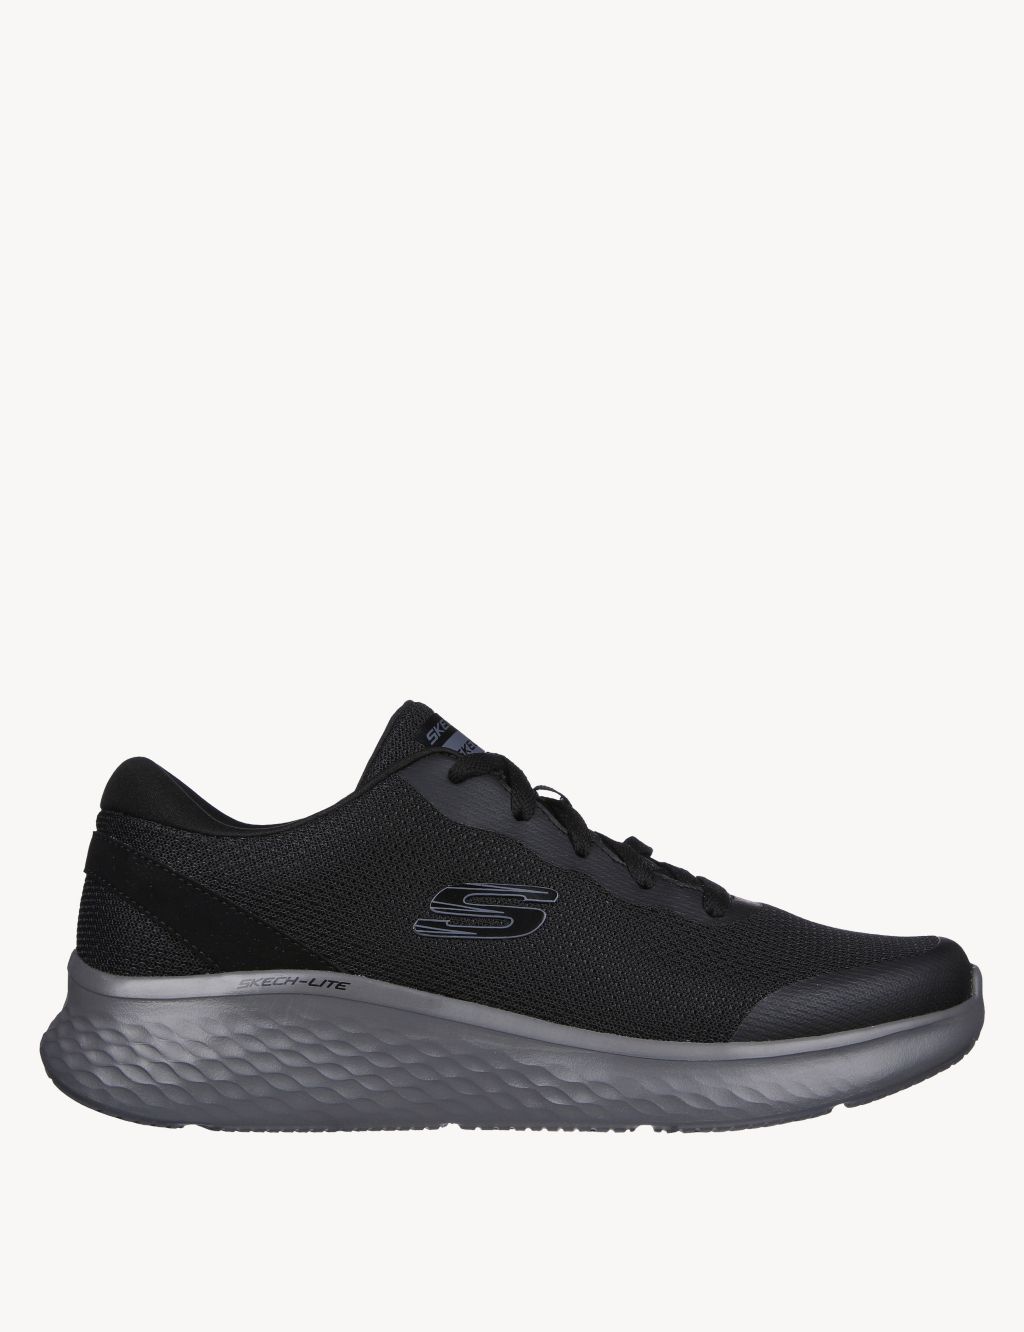 Skech-Lite Pro Clear Rush Lace Up Trainers image 2